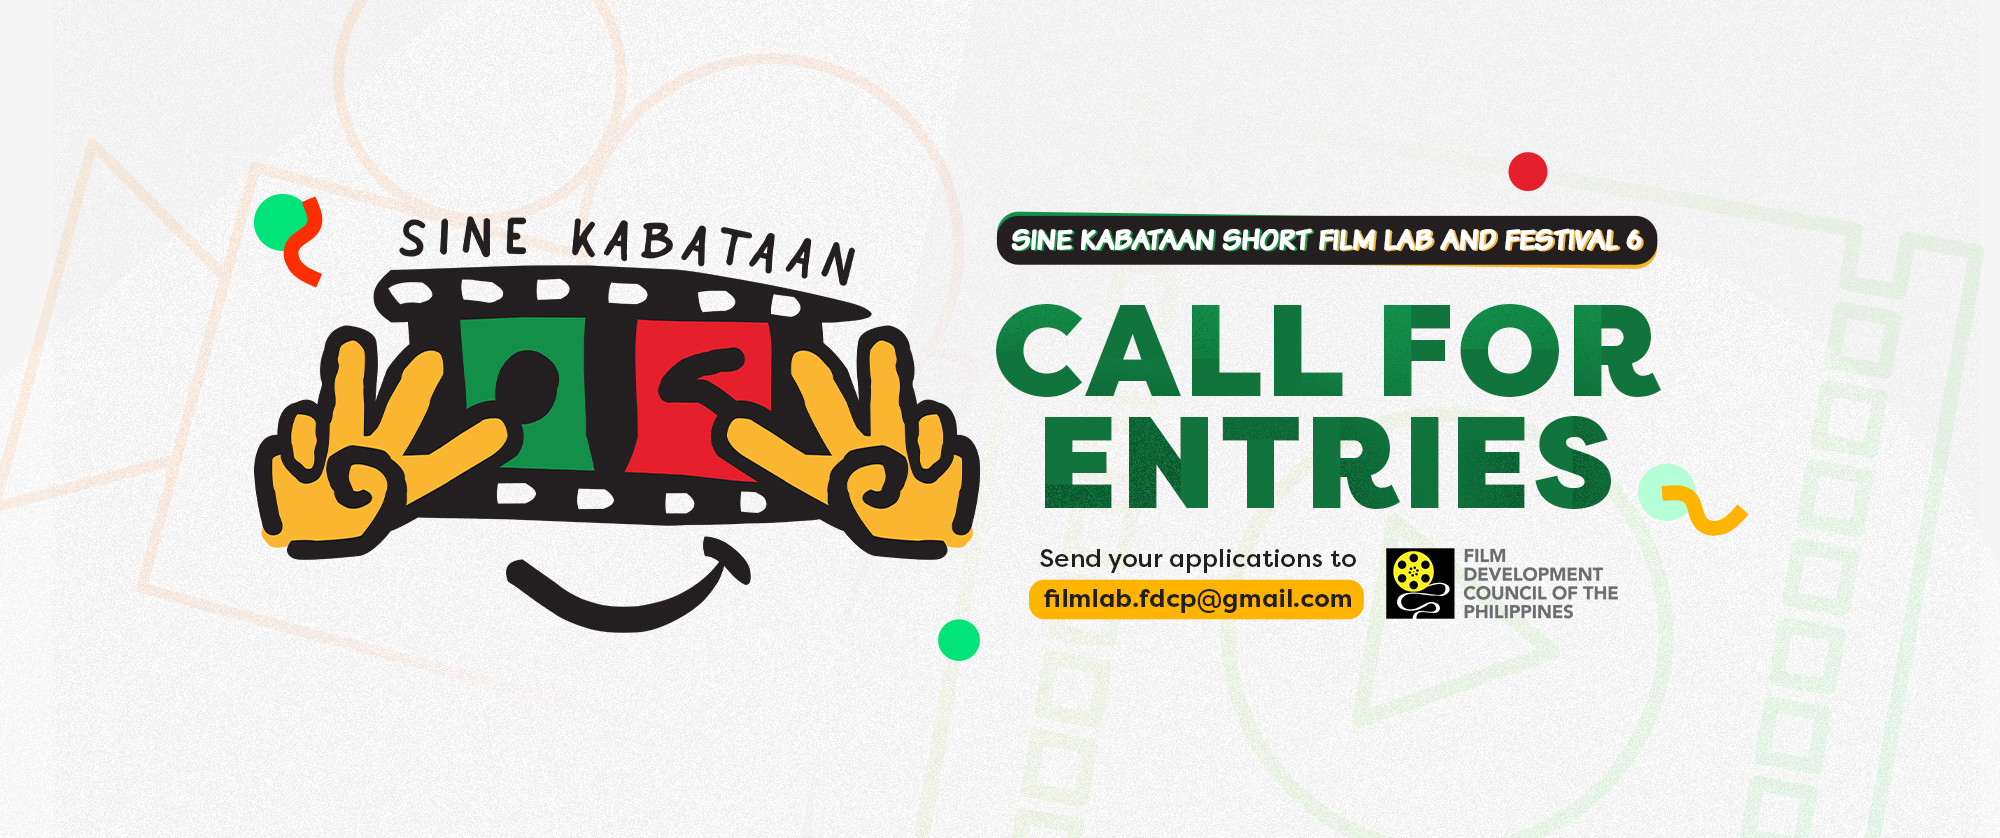 Sine Kabataan Short Film Lab and Festival 6: Call for Entries